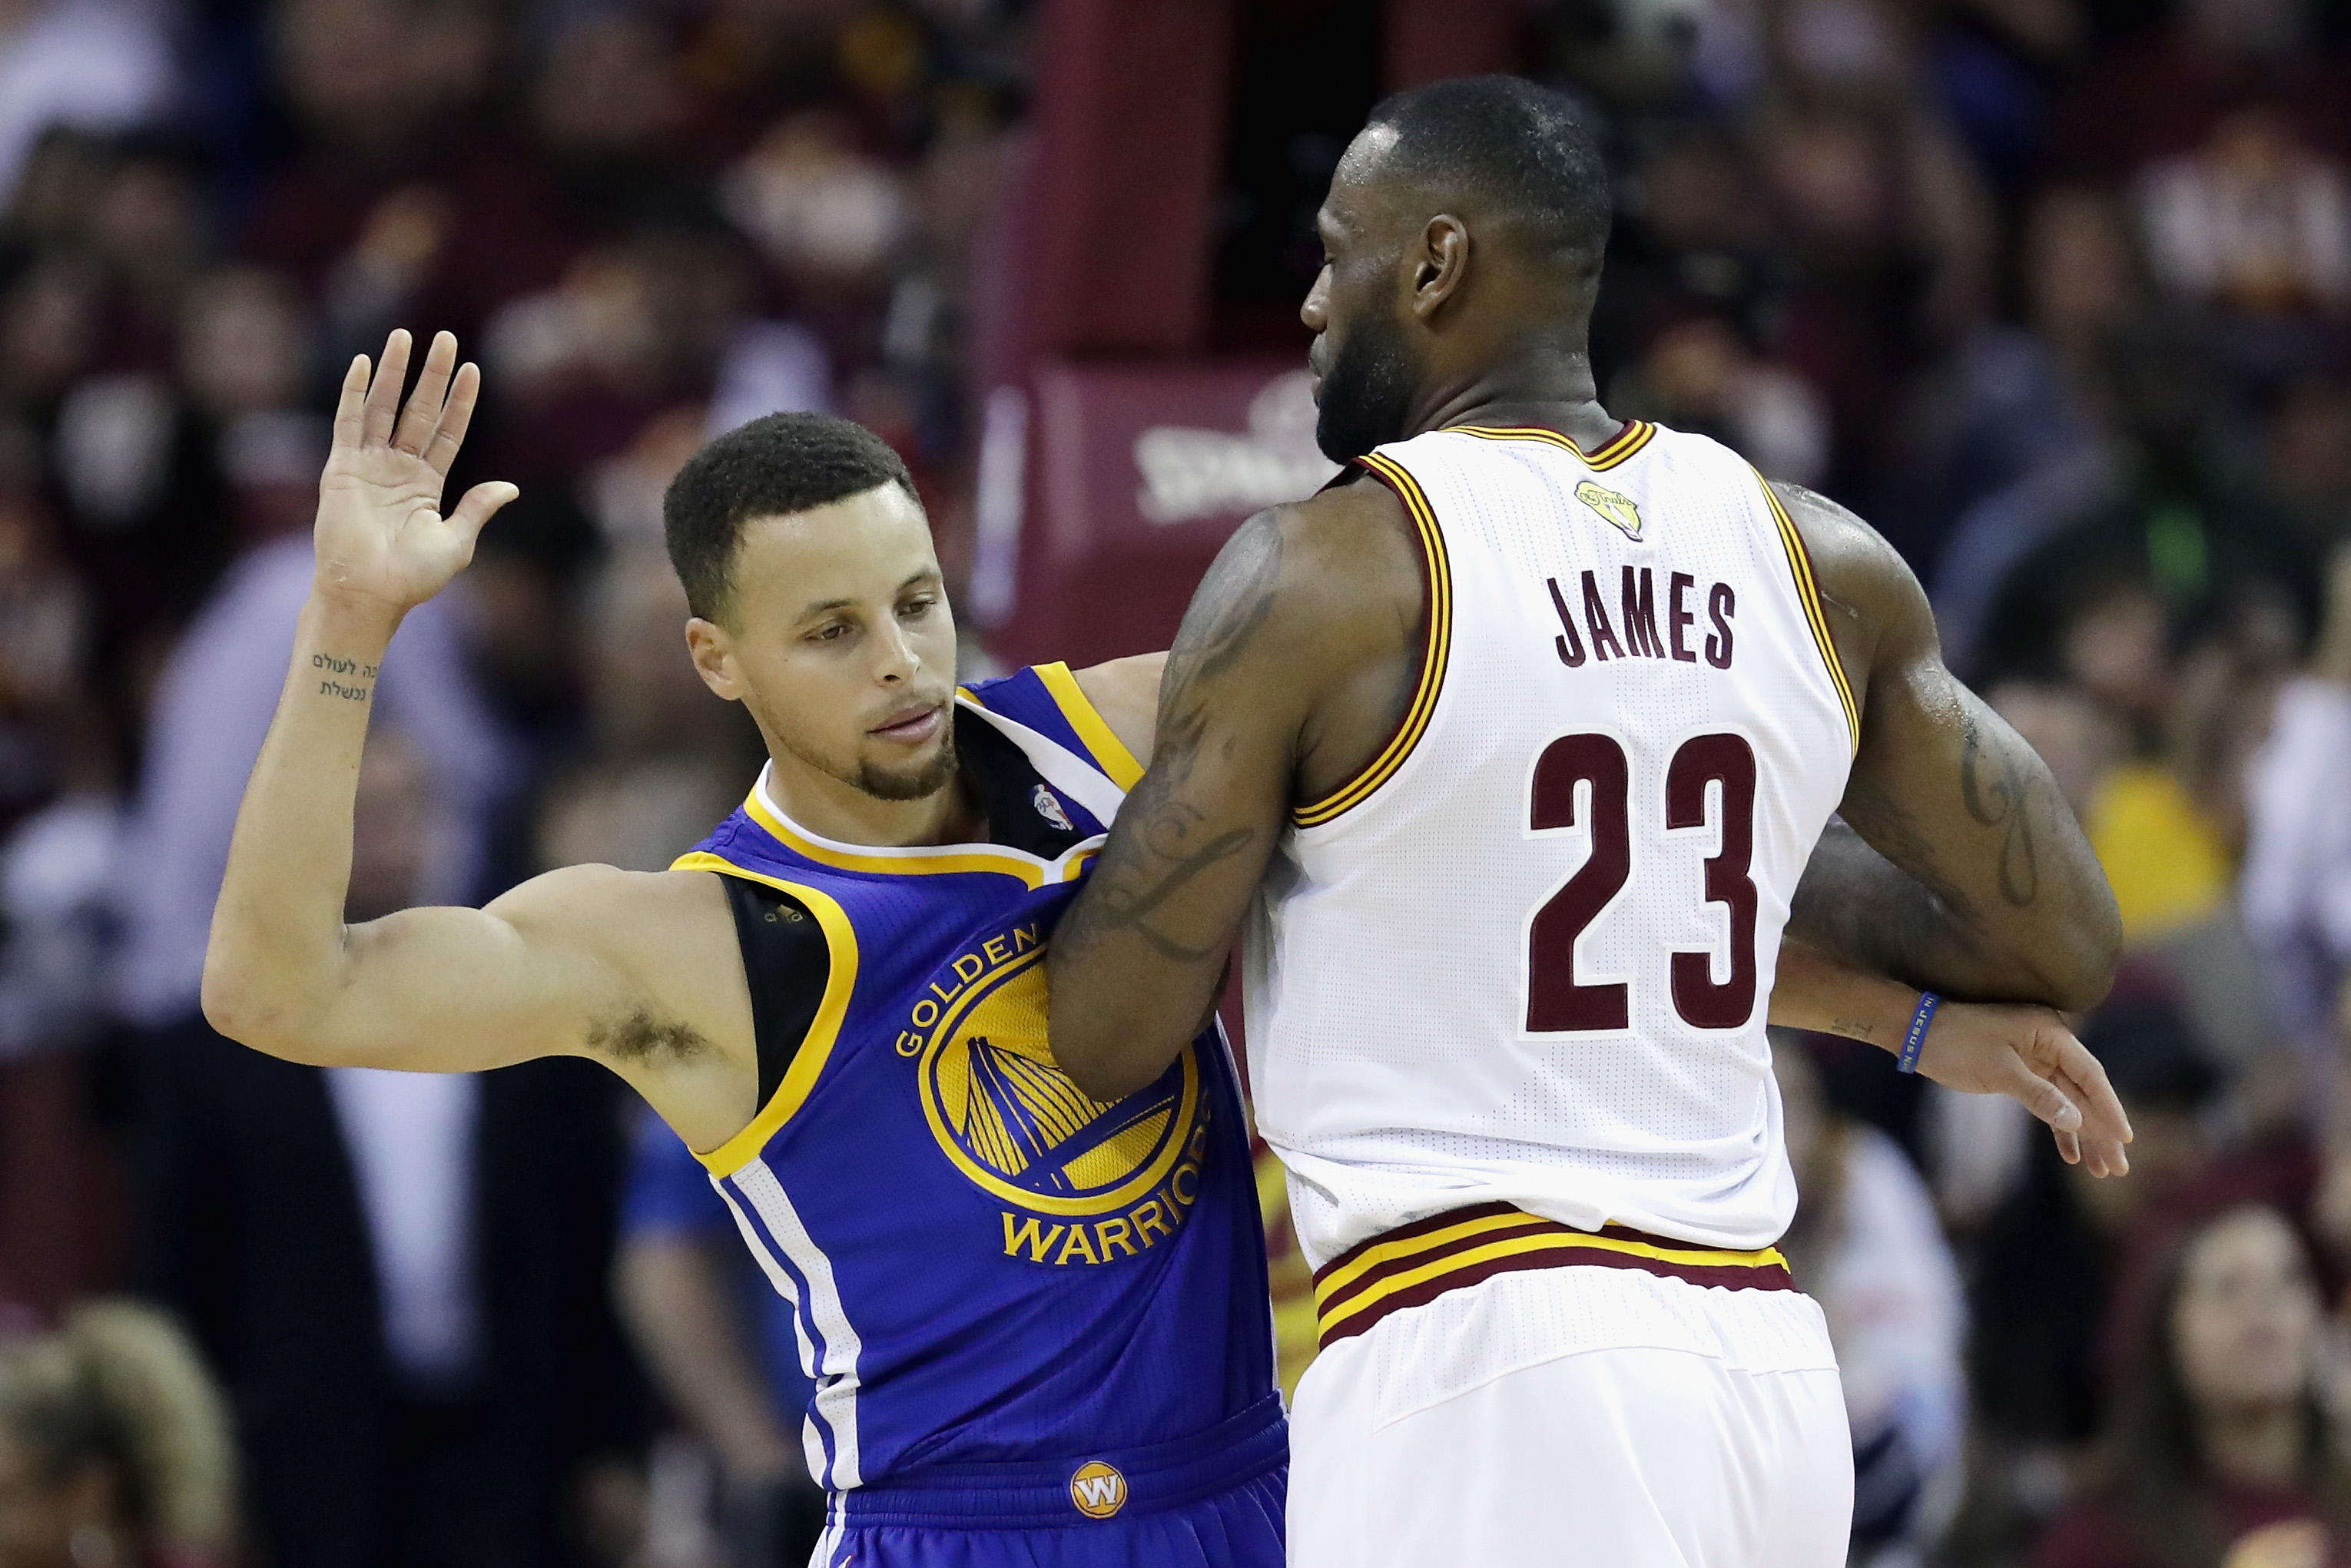  Warriors vs. Cavs Live Stream Watch Game 6 for Free 